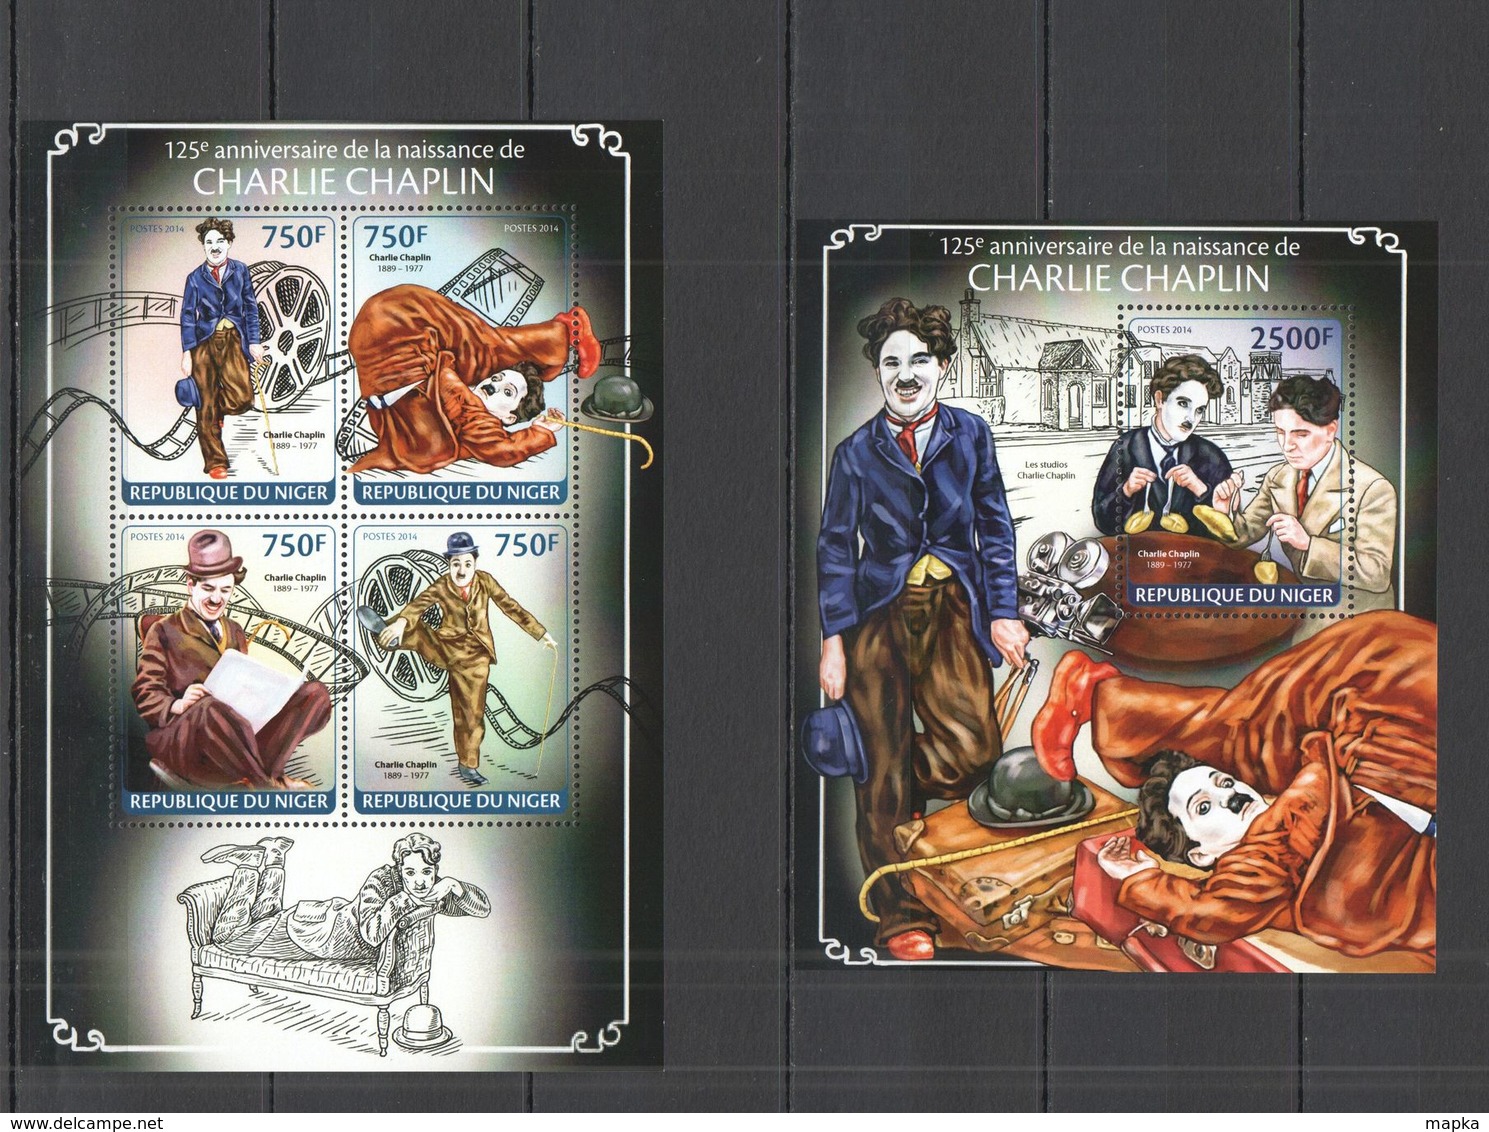 ST2685 2014 NIGER FAMOUS PEOPLE 125TH ANNIVERSARY CHARLIE CHAPLIN KB+BL MNH - Actors